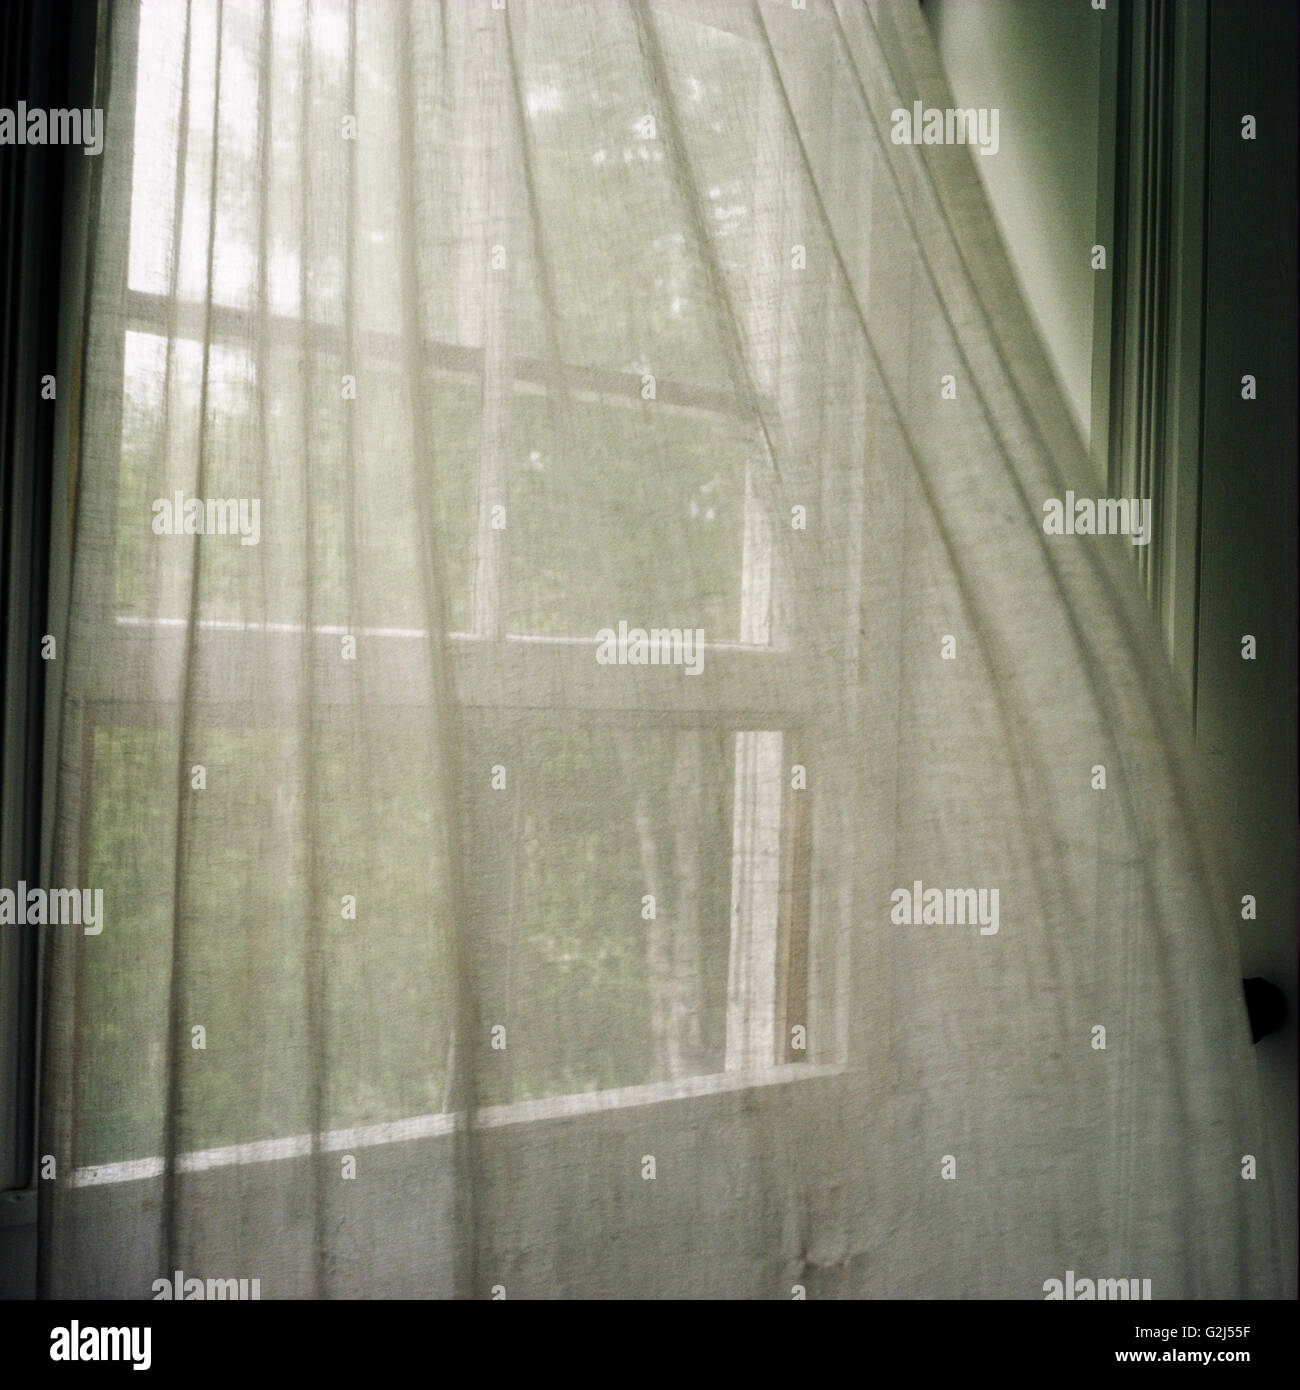 Window Curtains Blown by Breeze Stock Photo